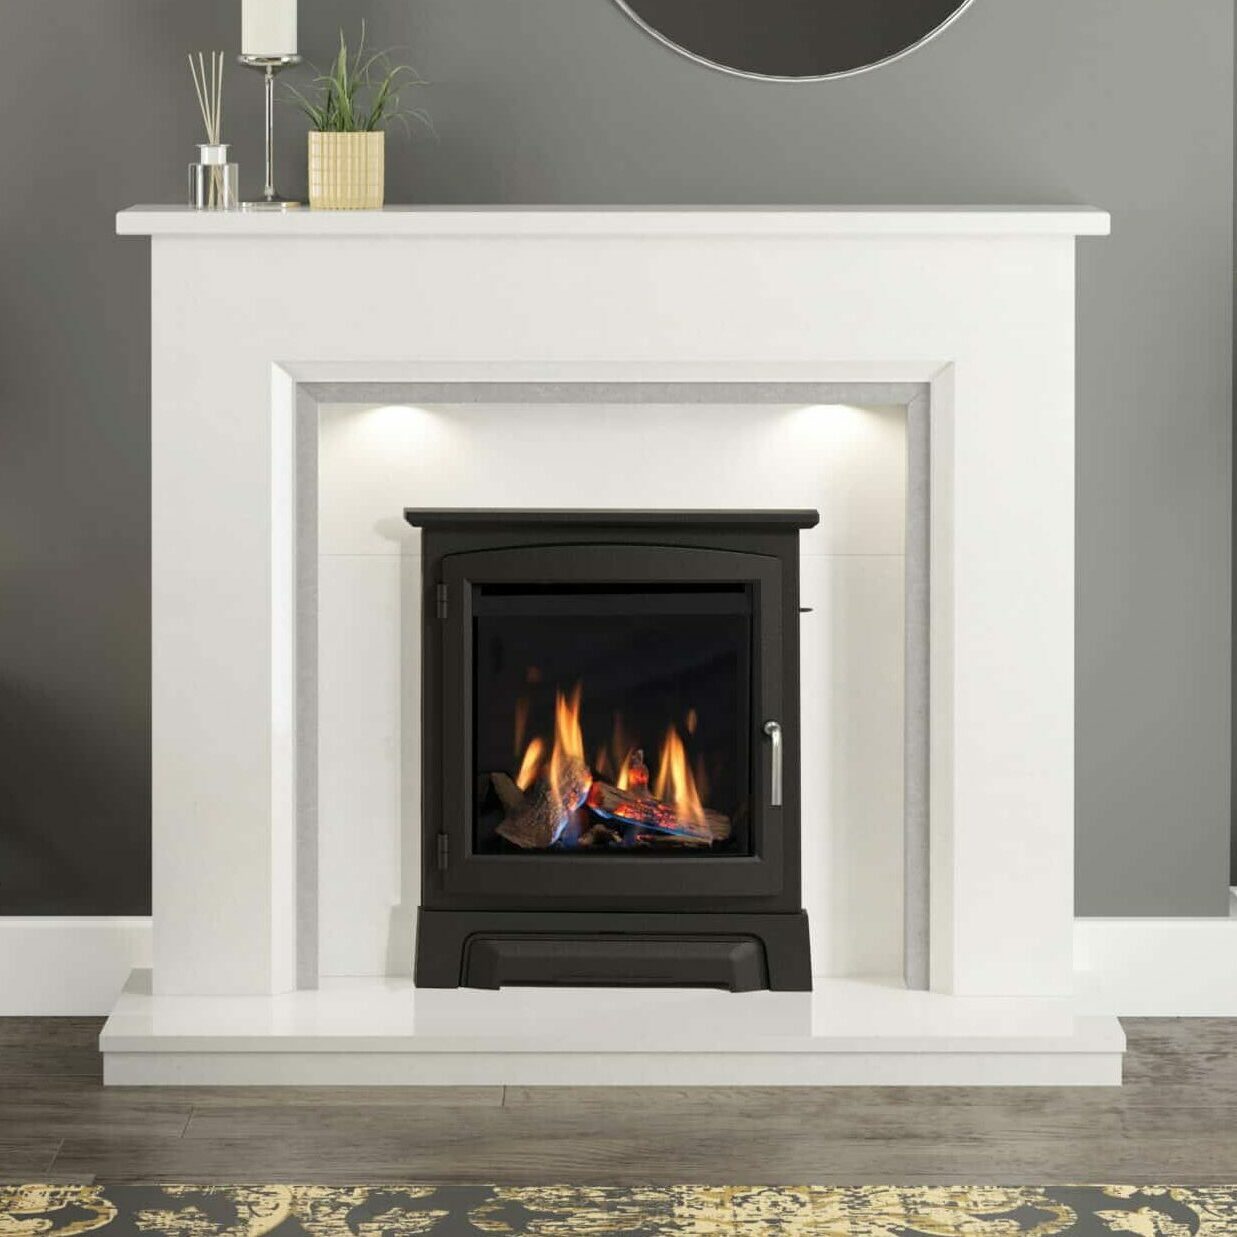 Highcliffe 16 with Cast Stove Front decor